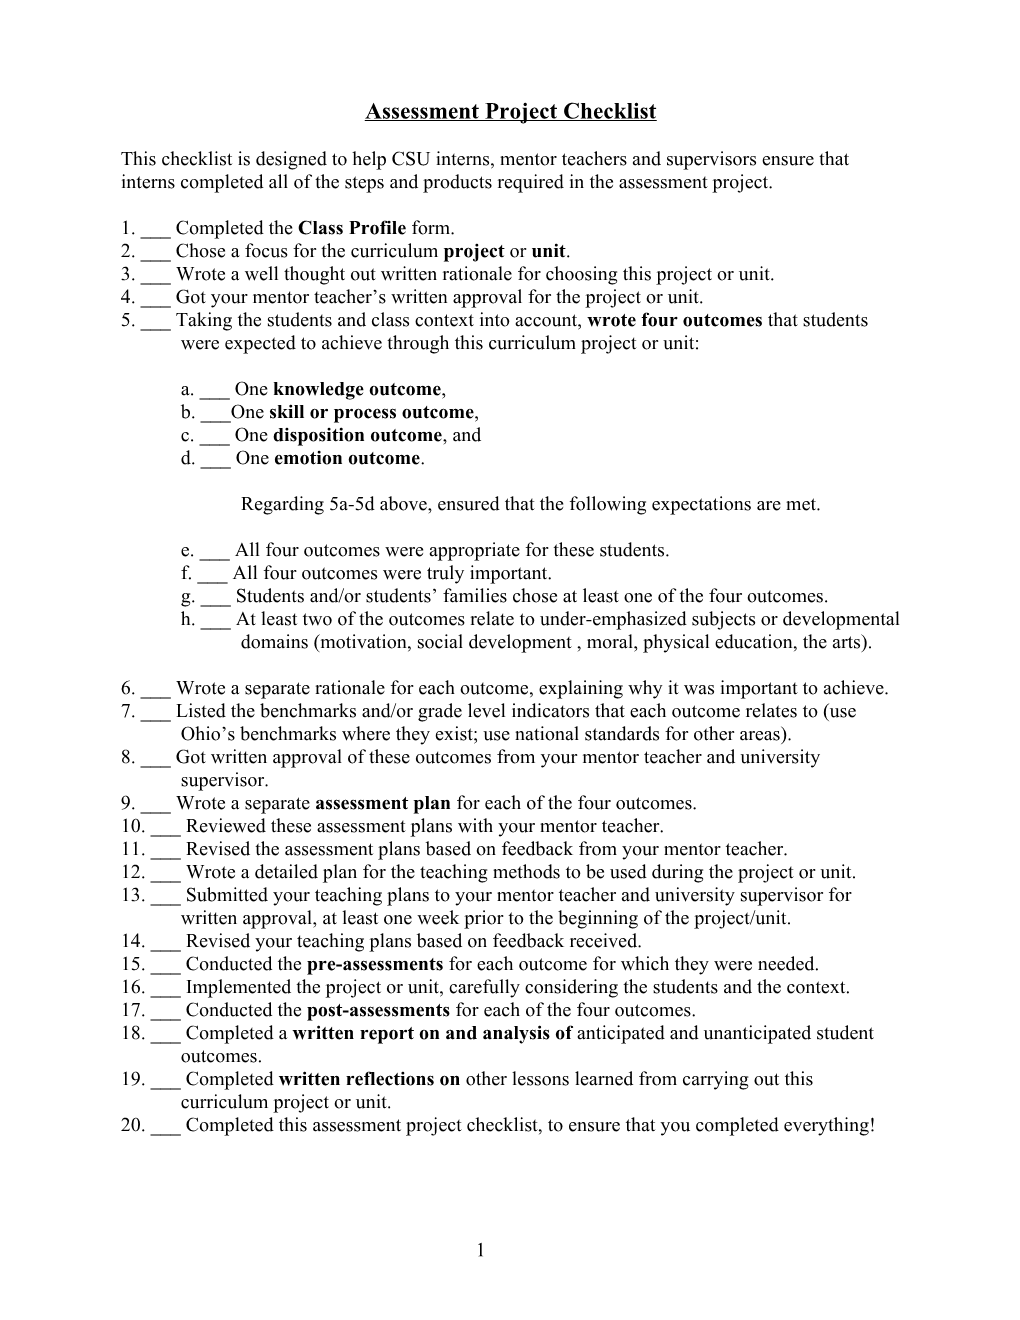 Assessment Project Checklist